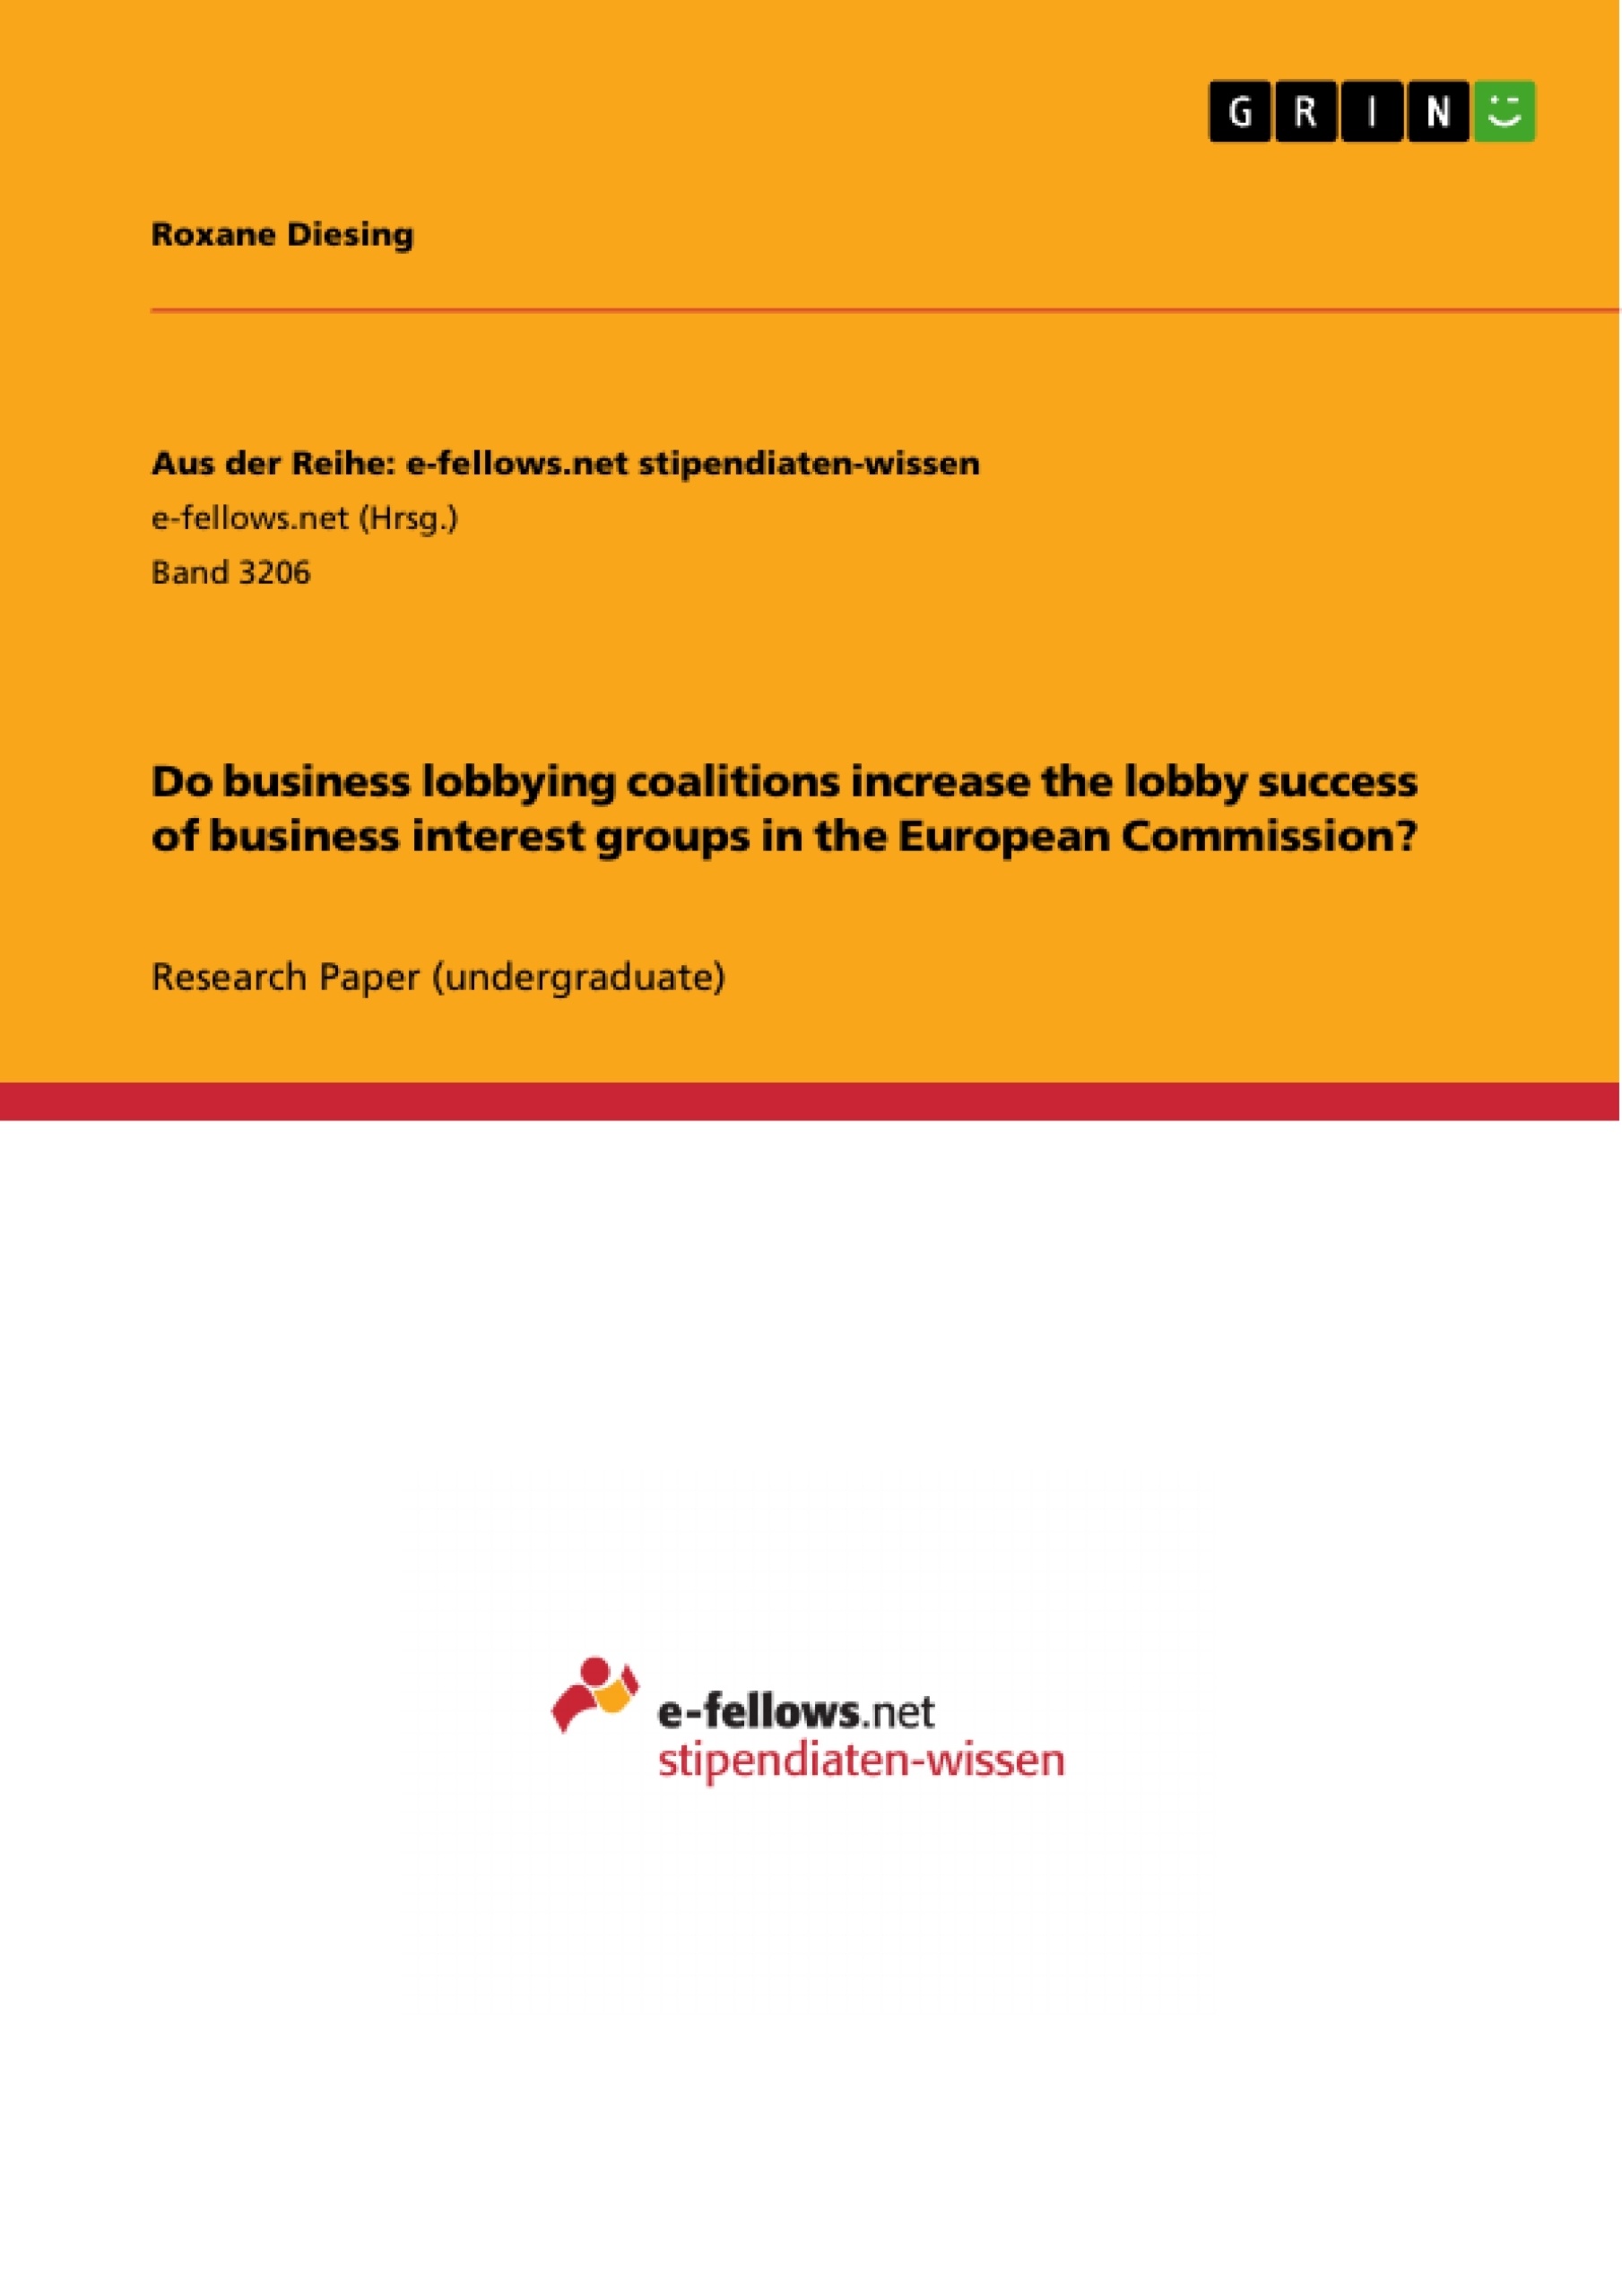 Titre: Do business lobbying coalitions increase the lobby success of business interest groups in the European Commission?